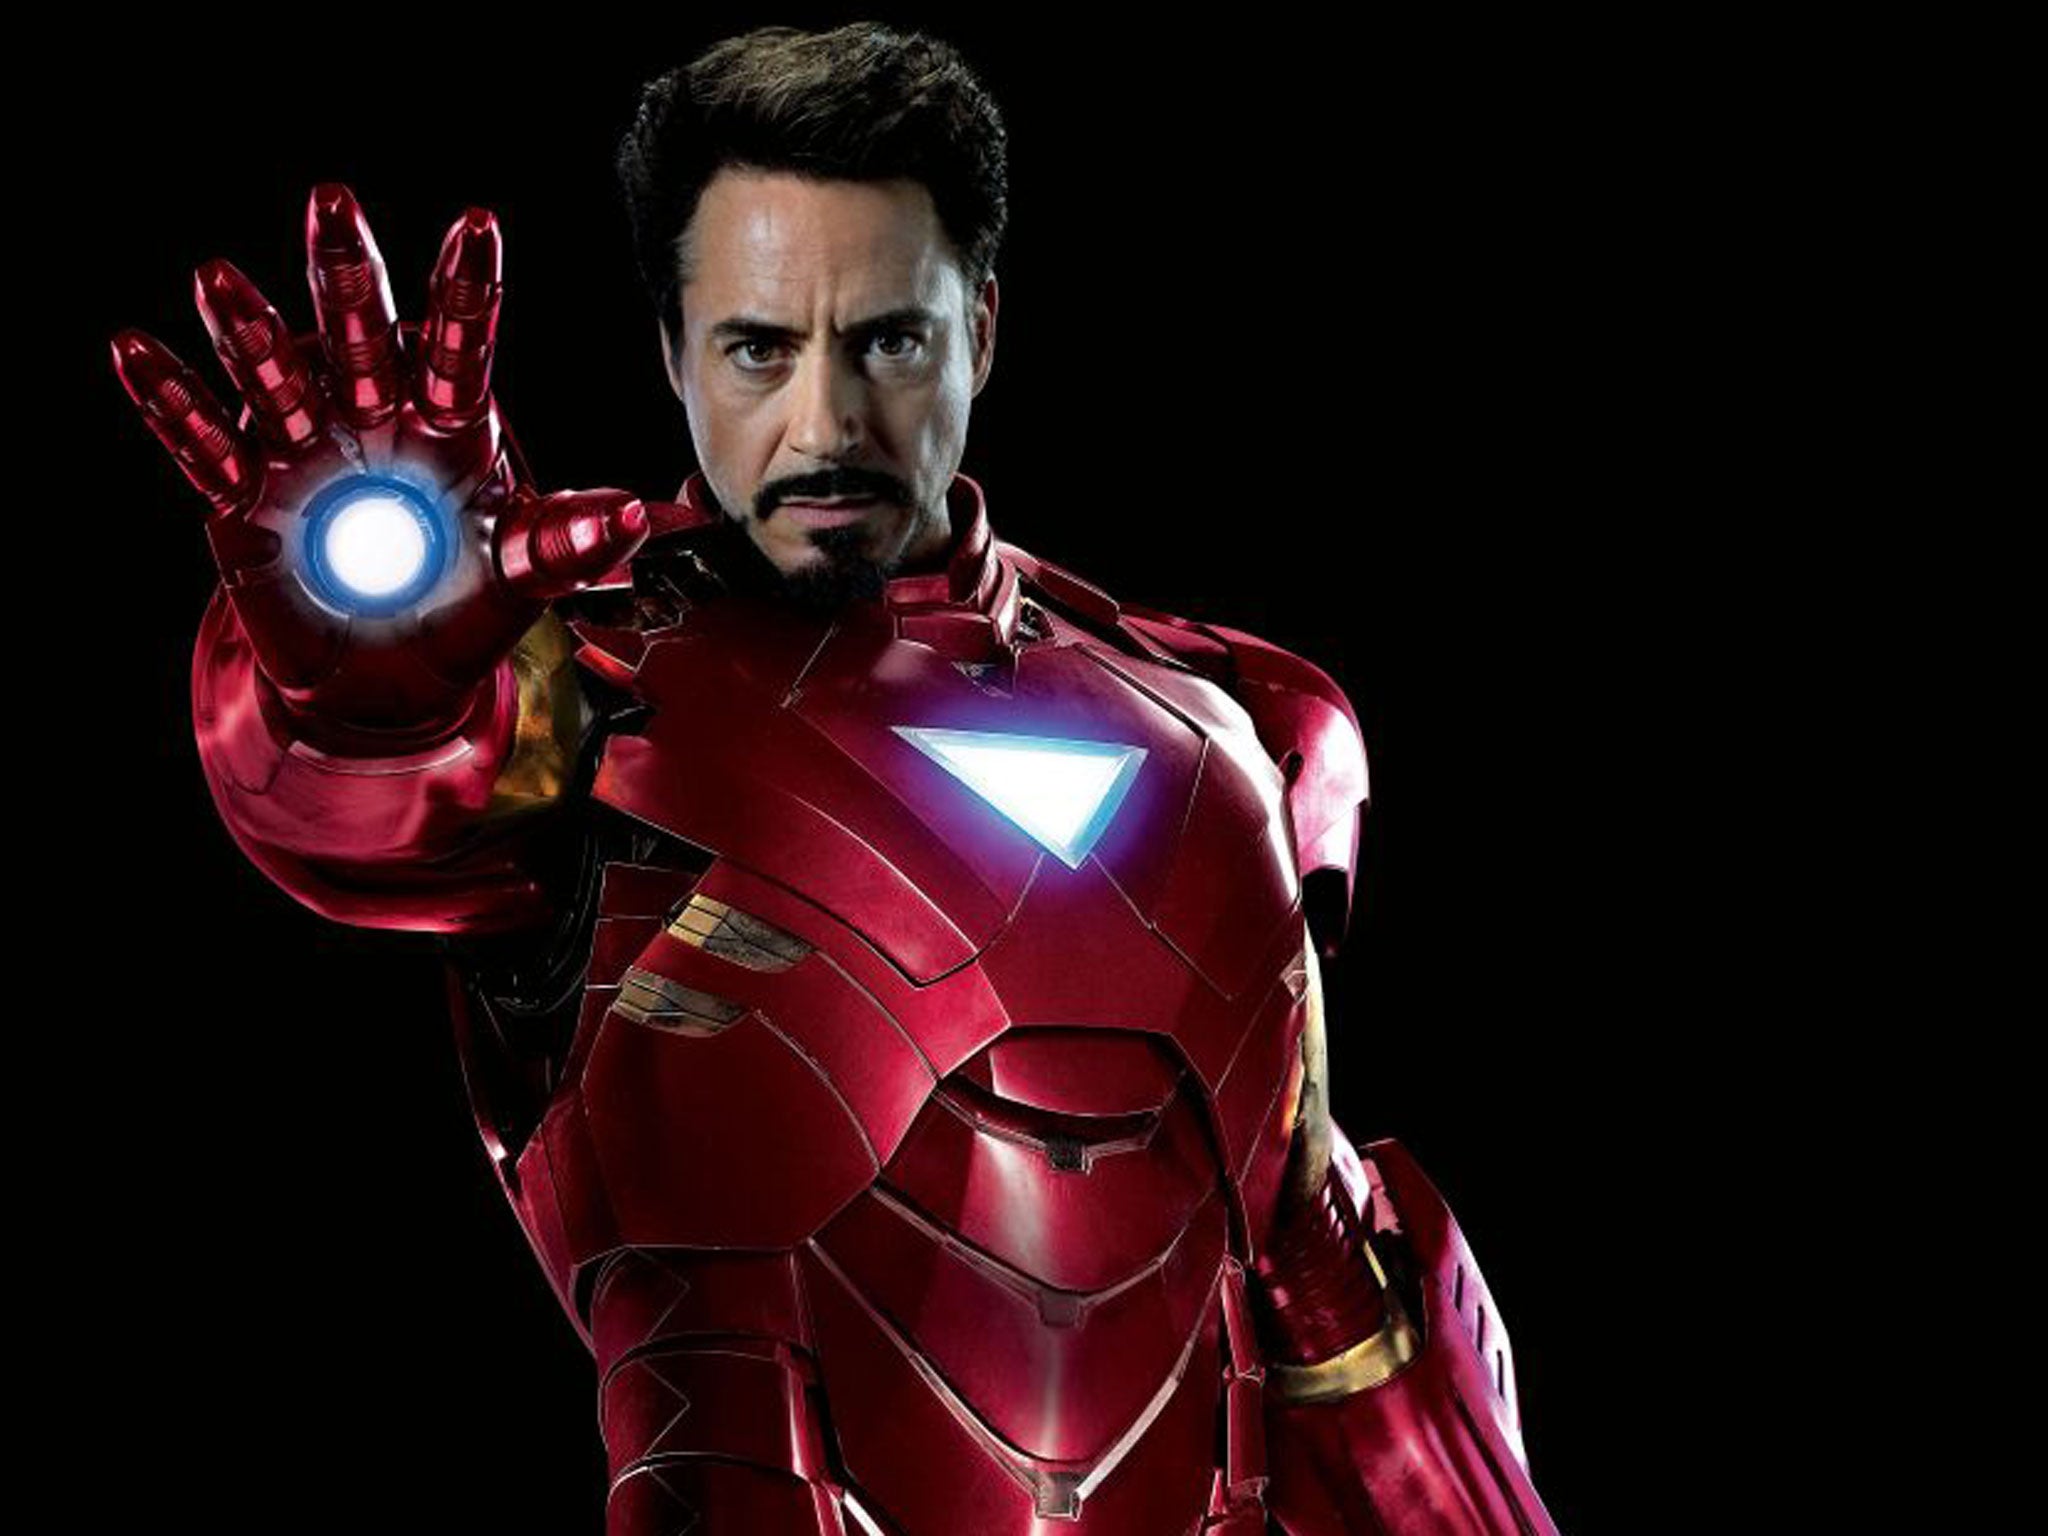 Robert Downey Jr in Iron Man 3 won favourite action movie star at the People's Choice Awards 2014